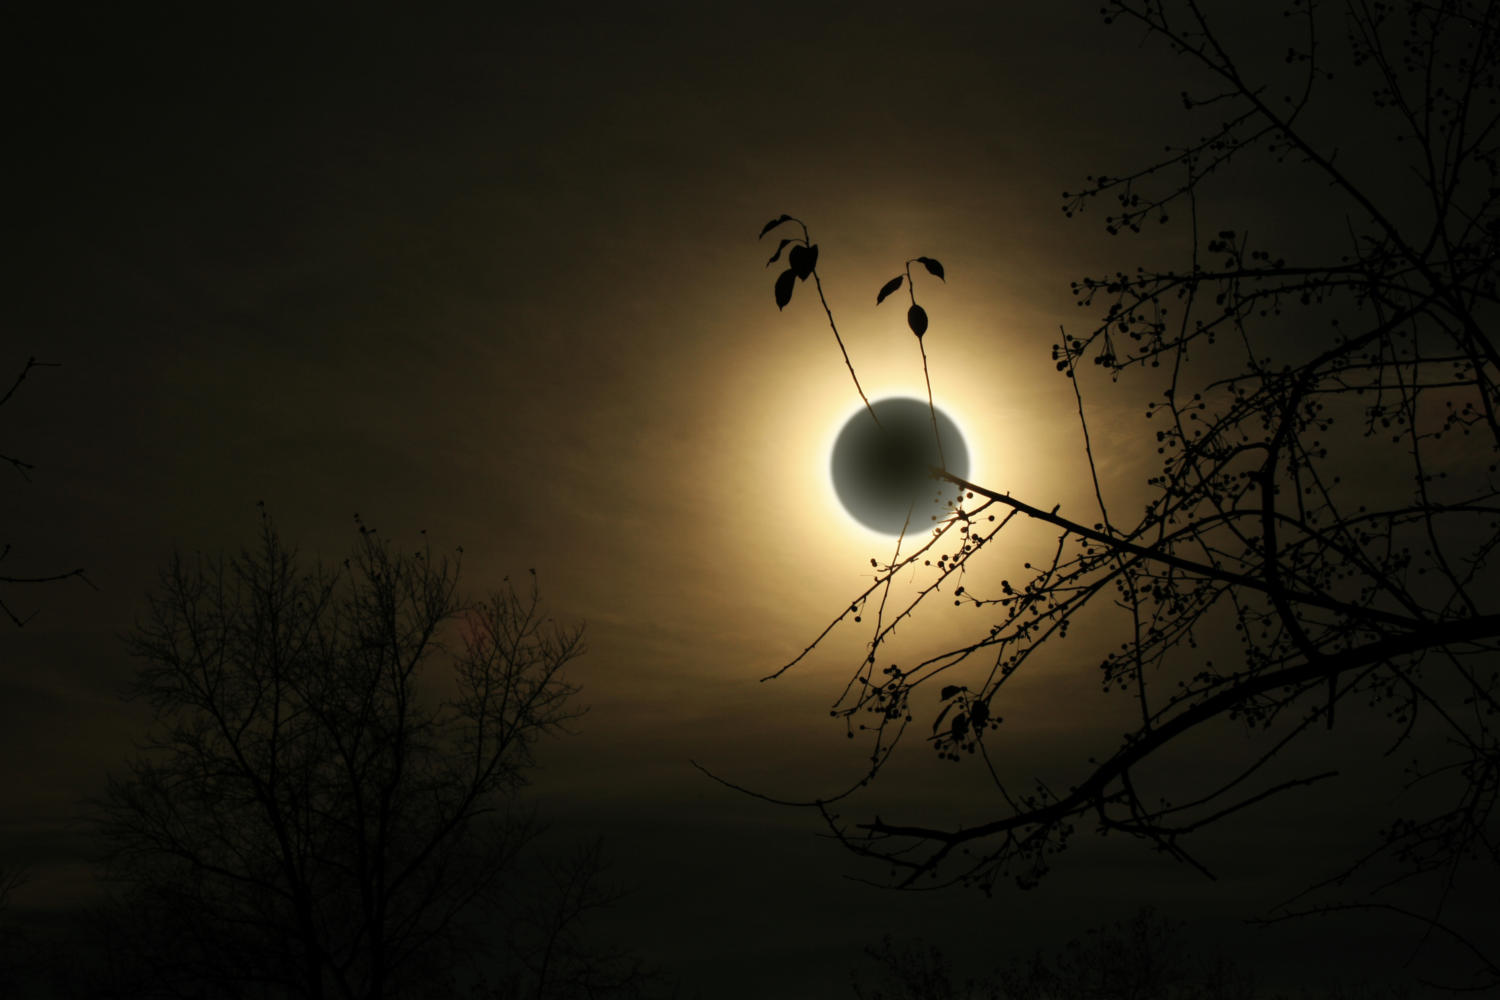 Idaho Falls braces for the world as eclipse-mania sweeps the small town. (Dreamstime/TNS)